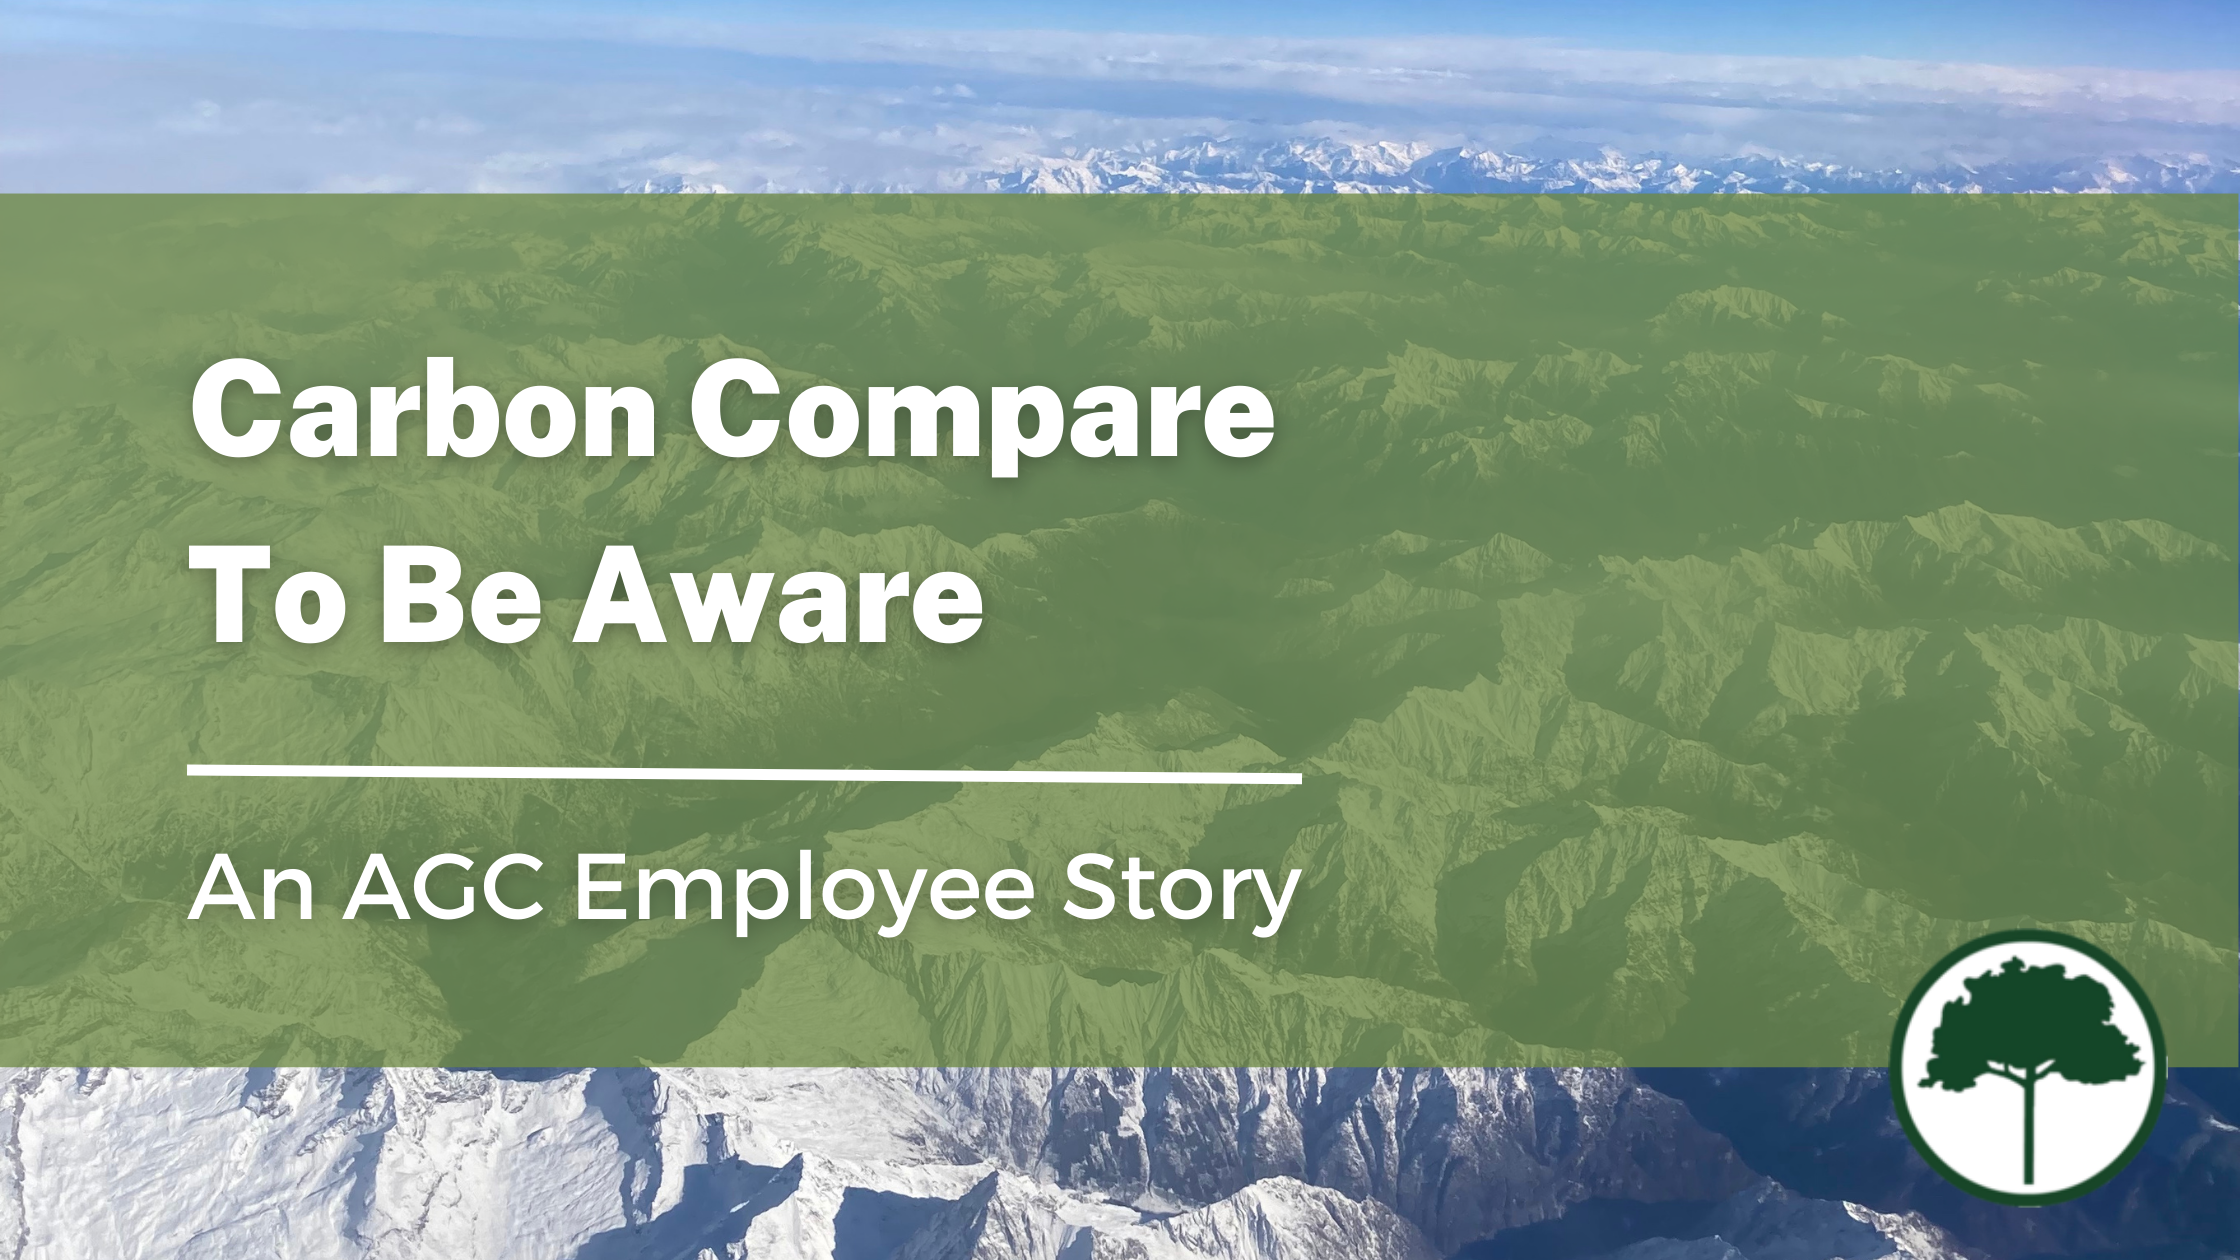 The background is a snowy mountain scene from an airplane. The text reads: "Carbon Compare To Be Aware"